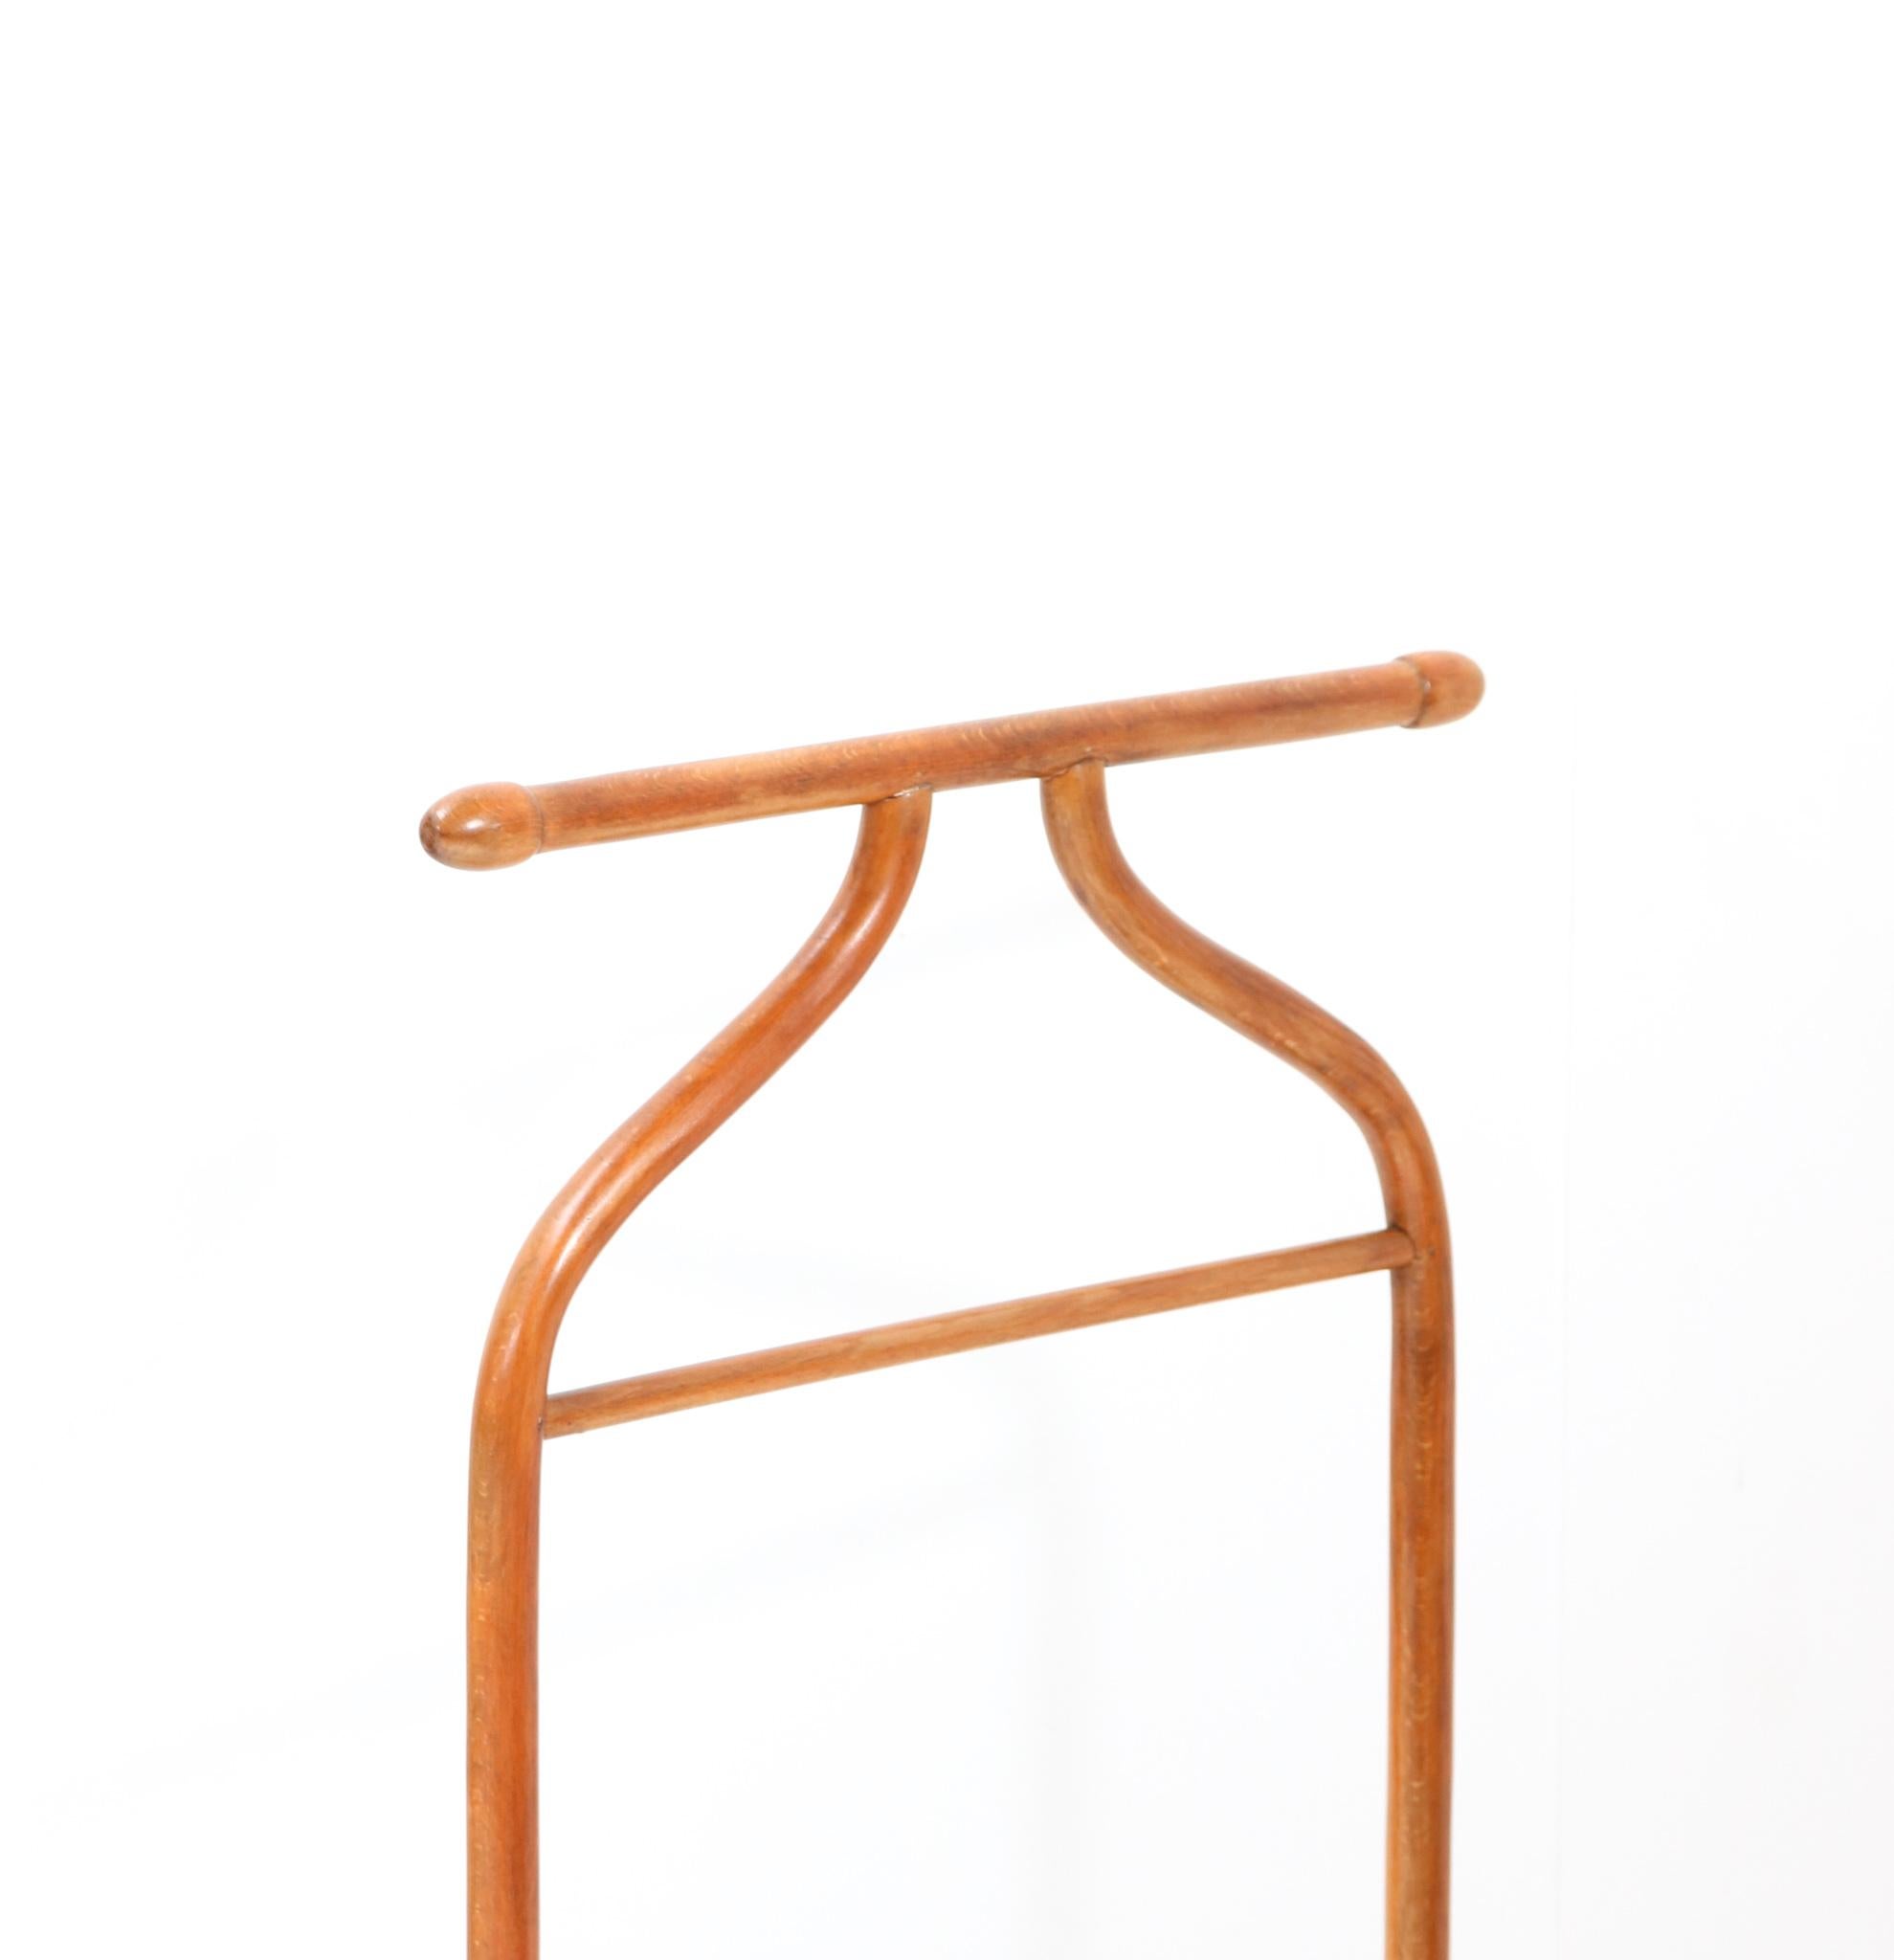 Early 20th Century Art Deco Stained Beech Bentwood Valet Stand or Rack by Thonet Vienna, 1920s For Sale